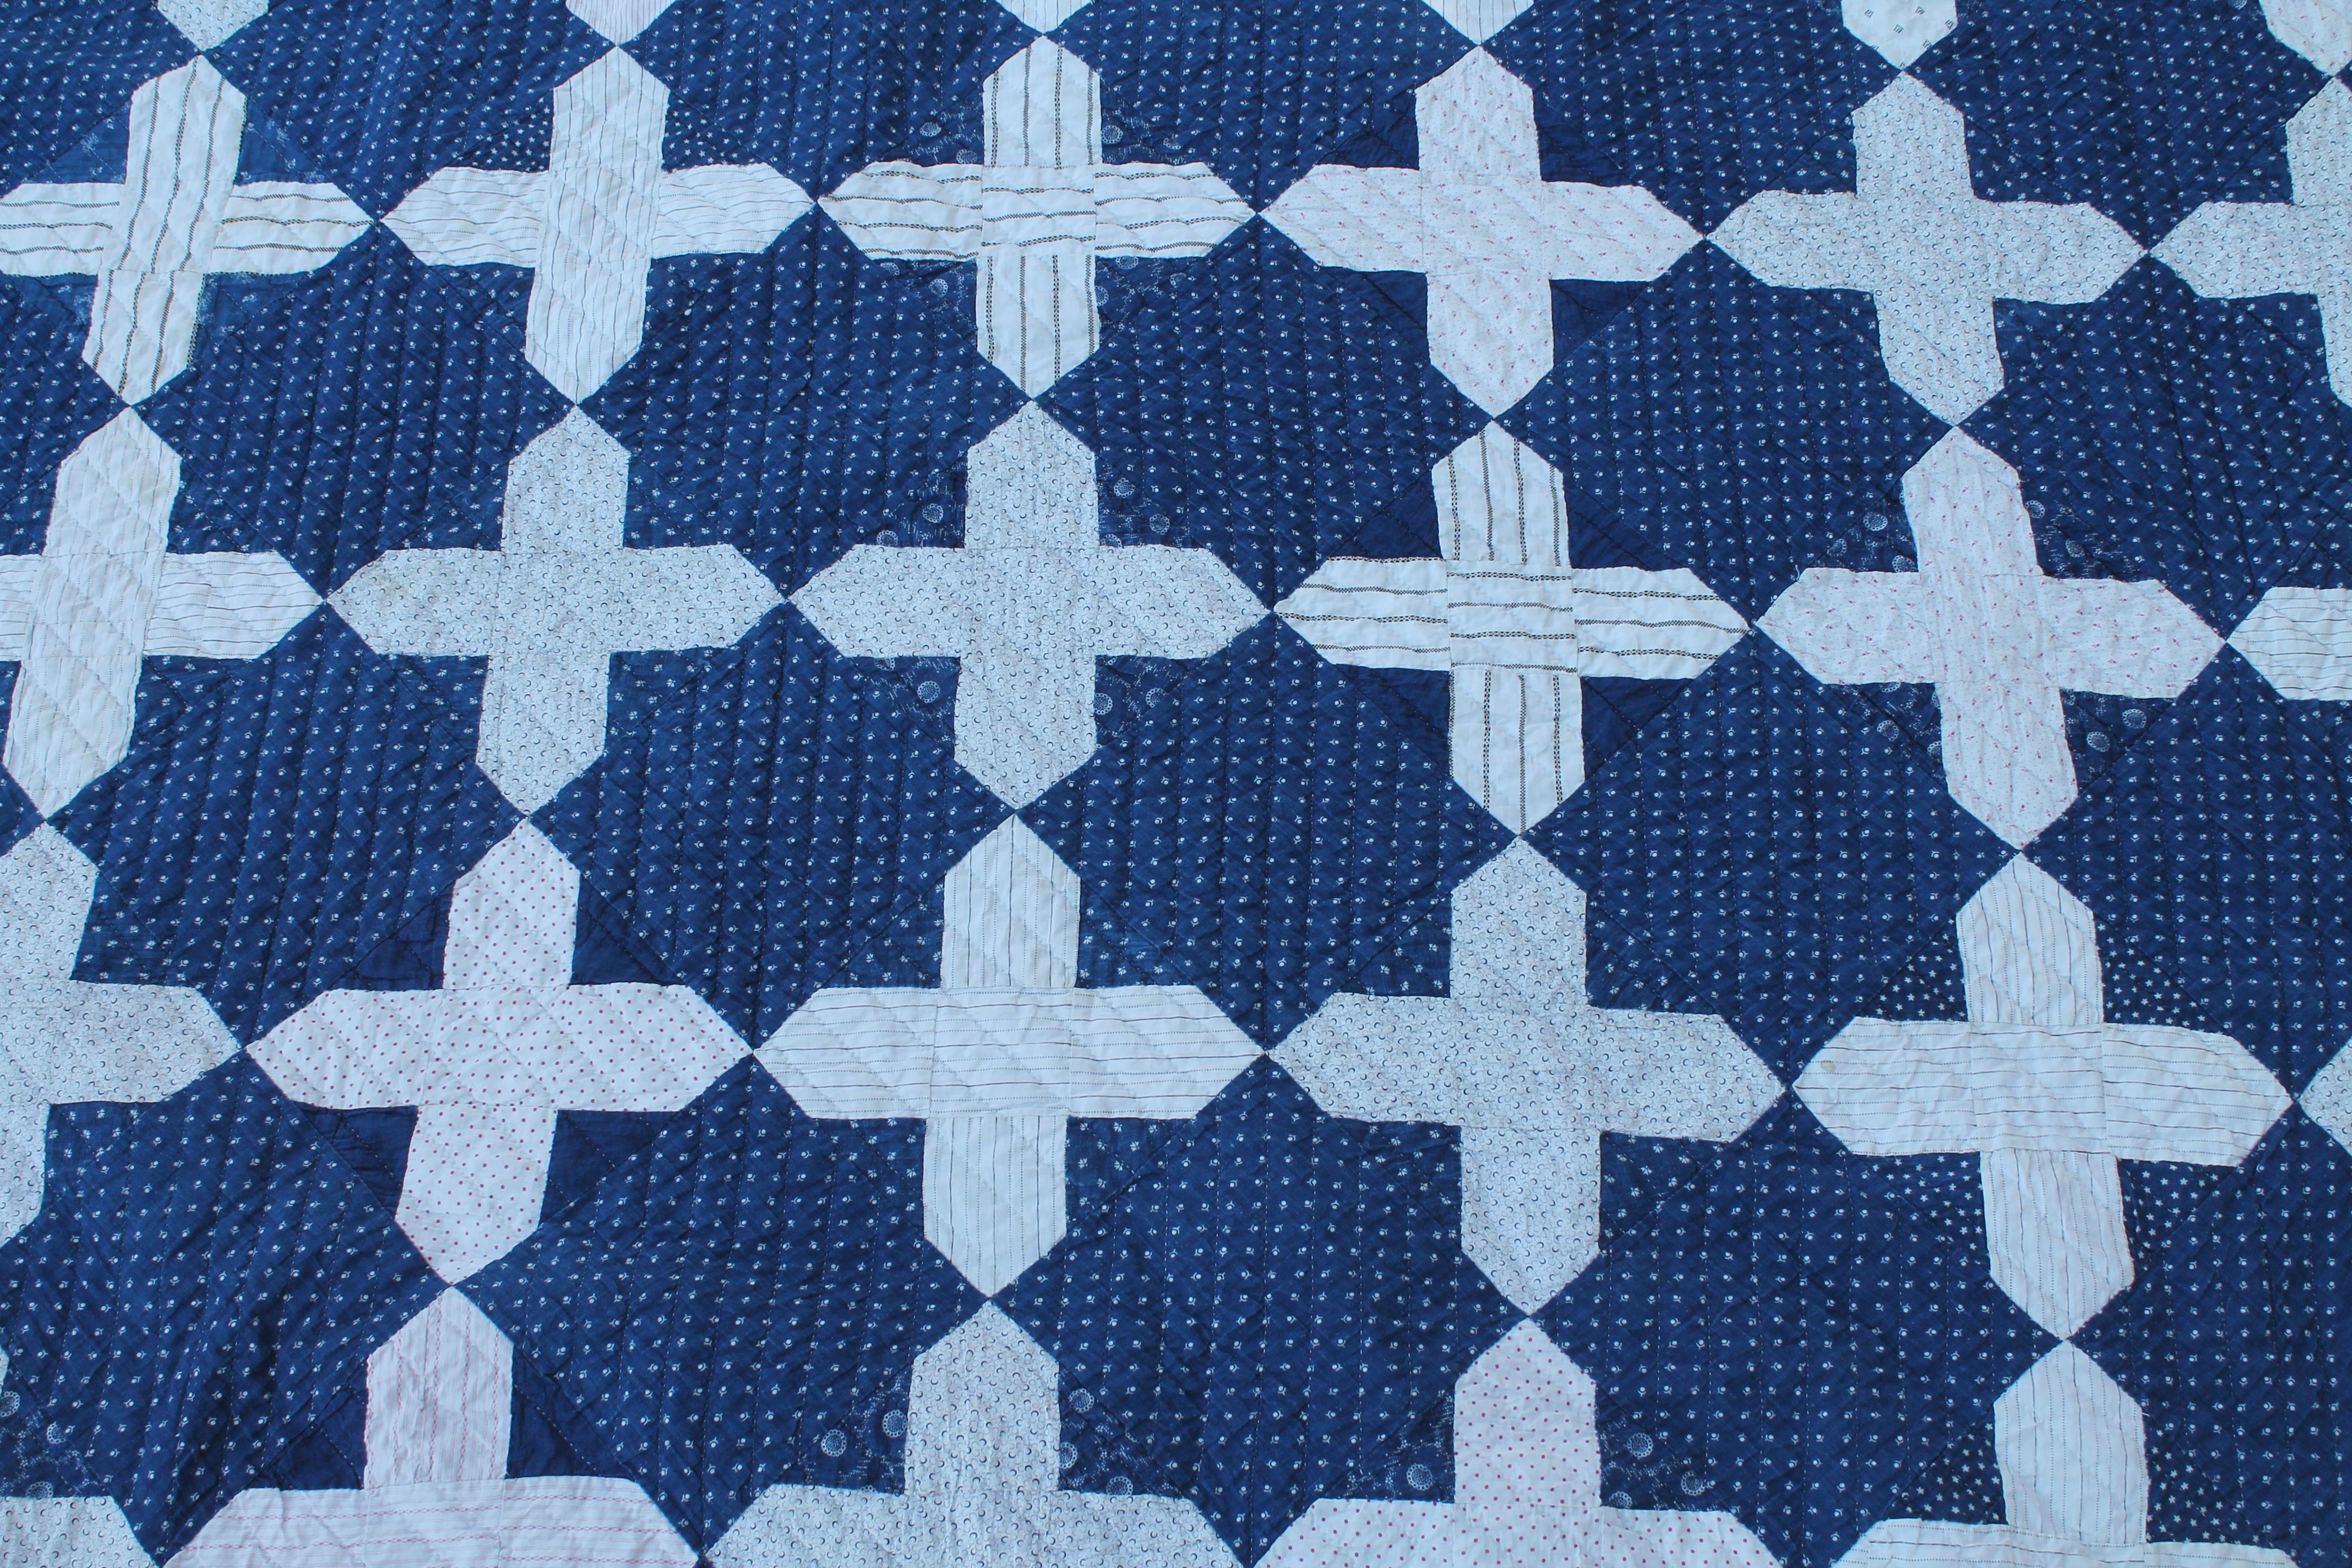 Adirondack Early Antique Quilt, 19th Century Blue and White Calico Quilt